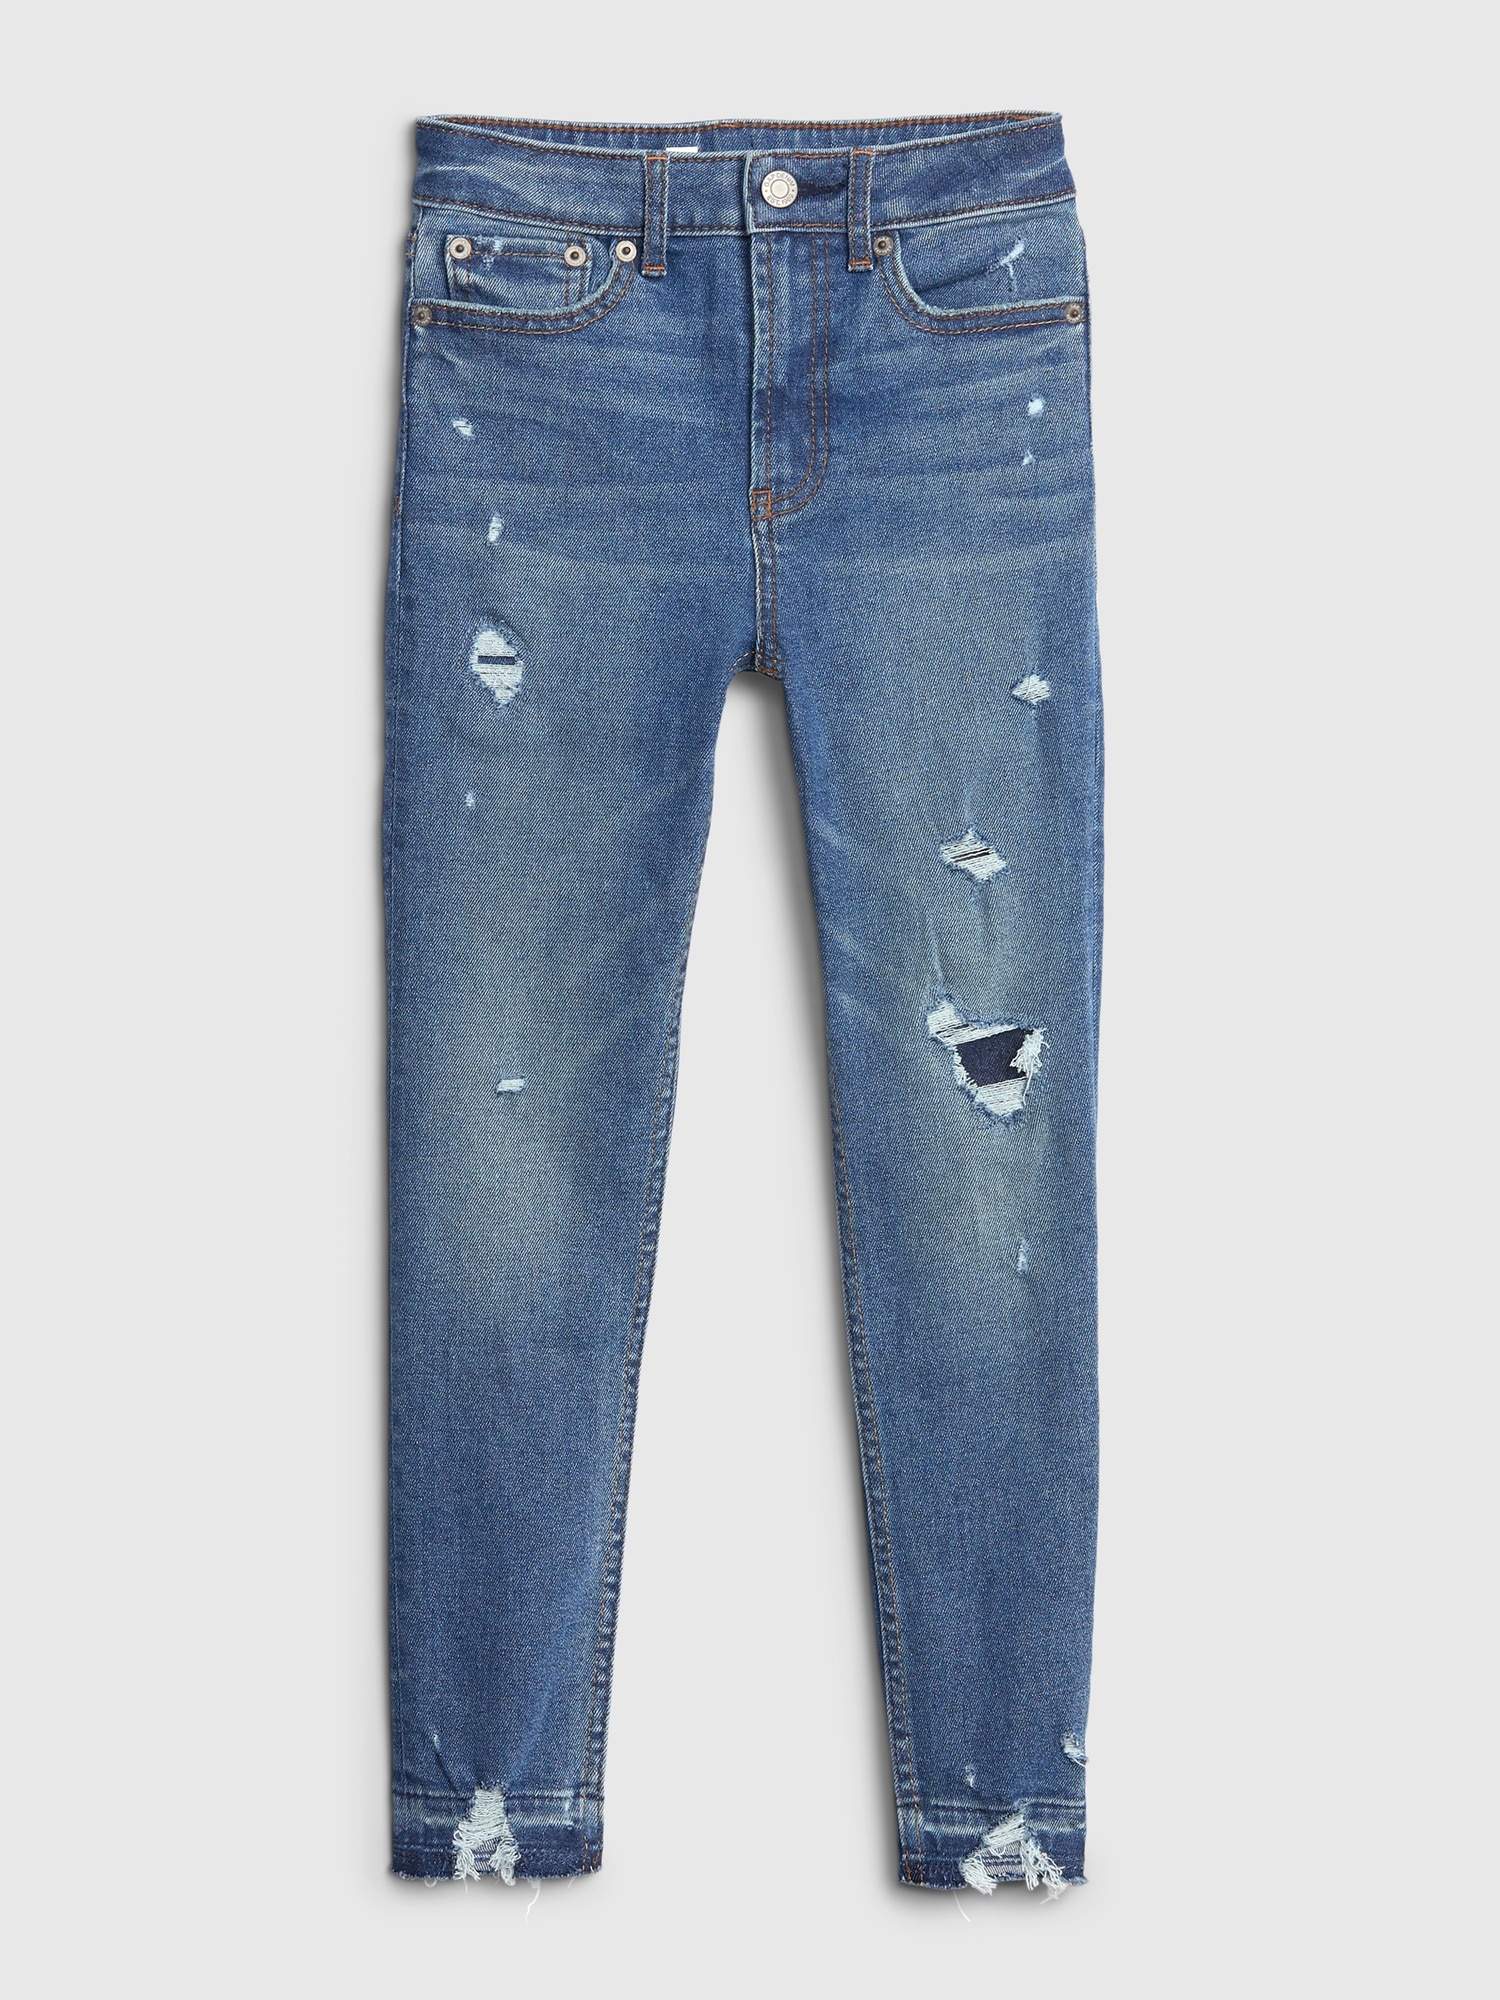 Teen Destructed Sky High Rise Skinny Ankle Jeans with Stretch | Gap